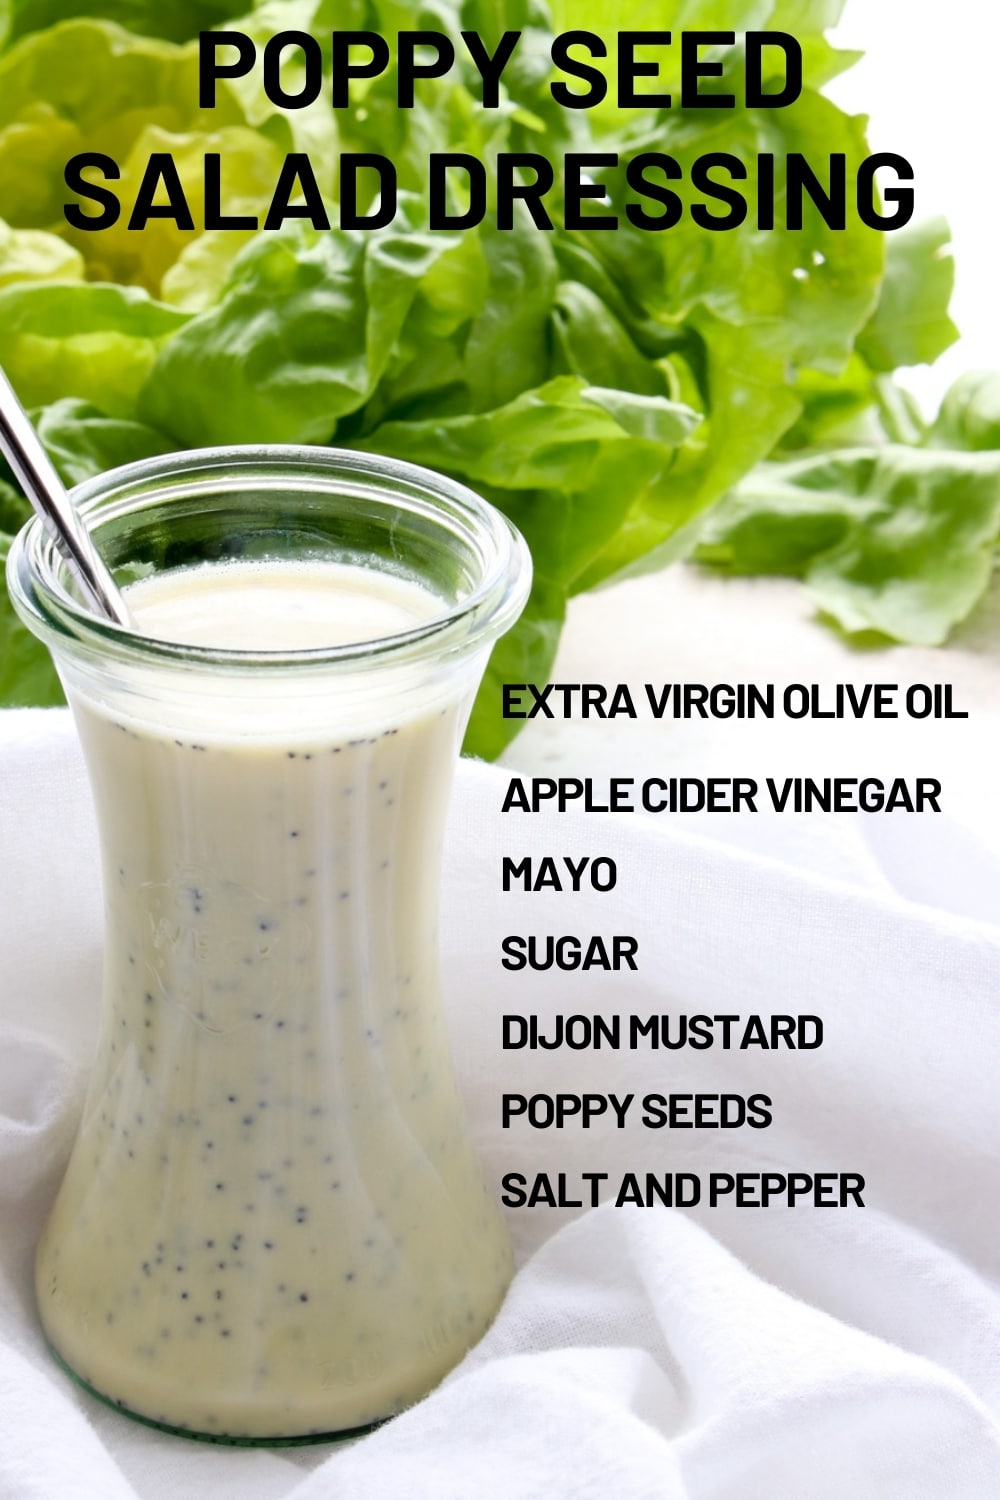 Jazz up any everyday salad with my homemade poppy seed dressing. It's the perfect balance of sweet and tangy and it's ready in minutes.  via @krazykitchenmom